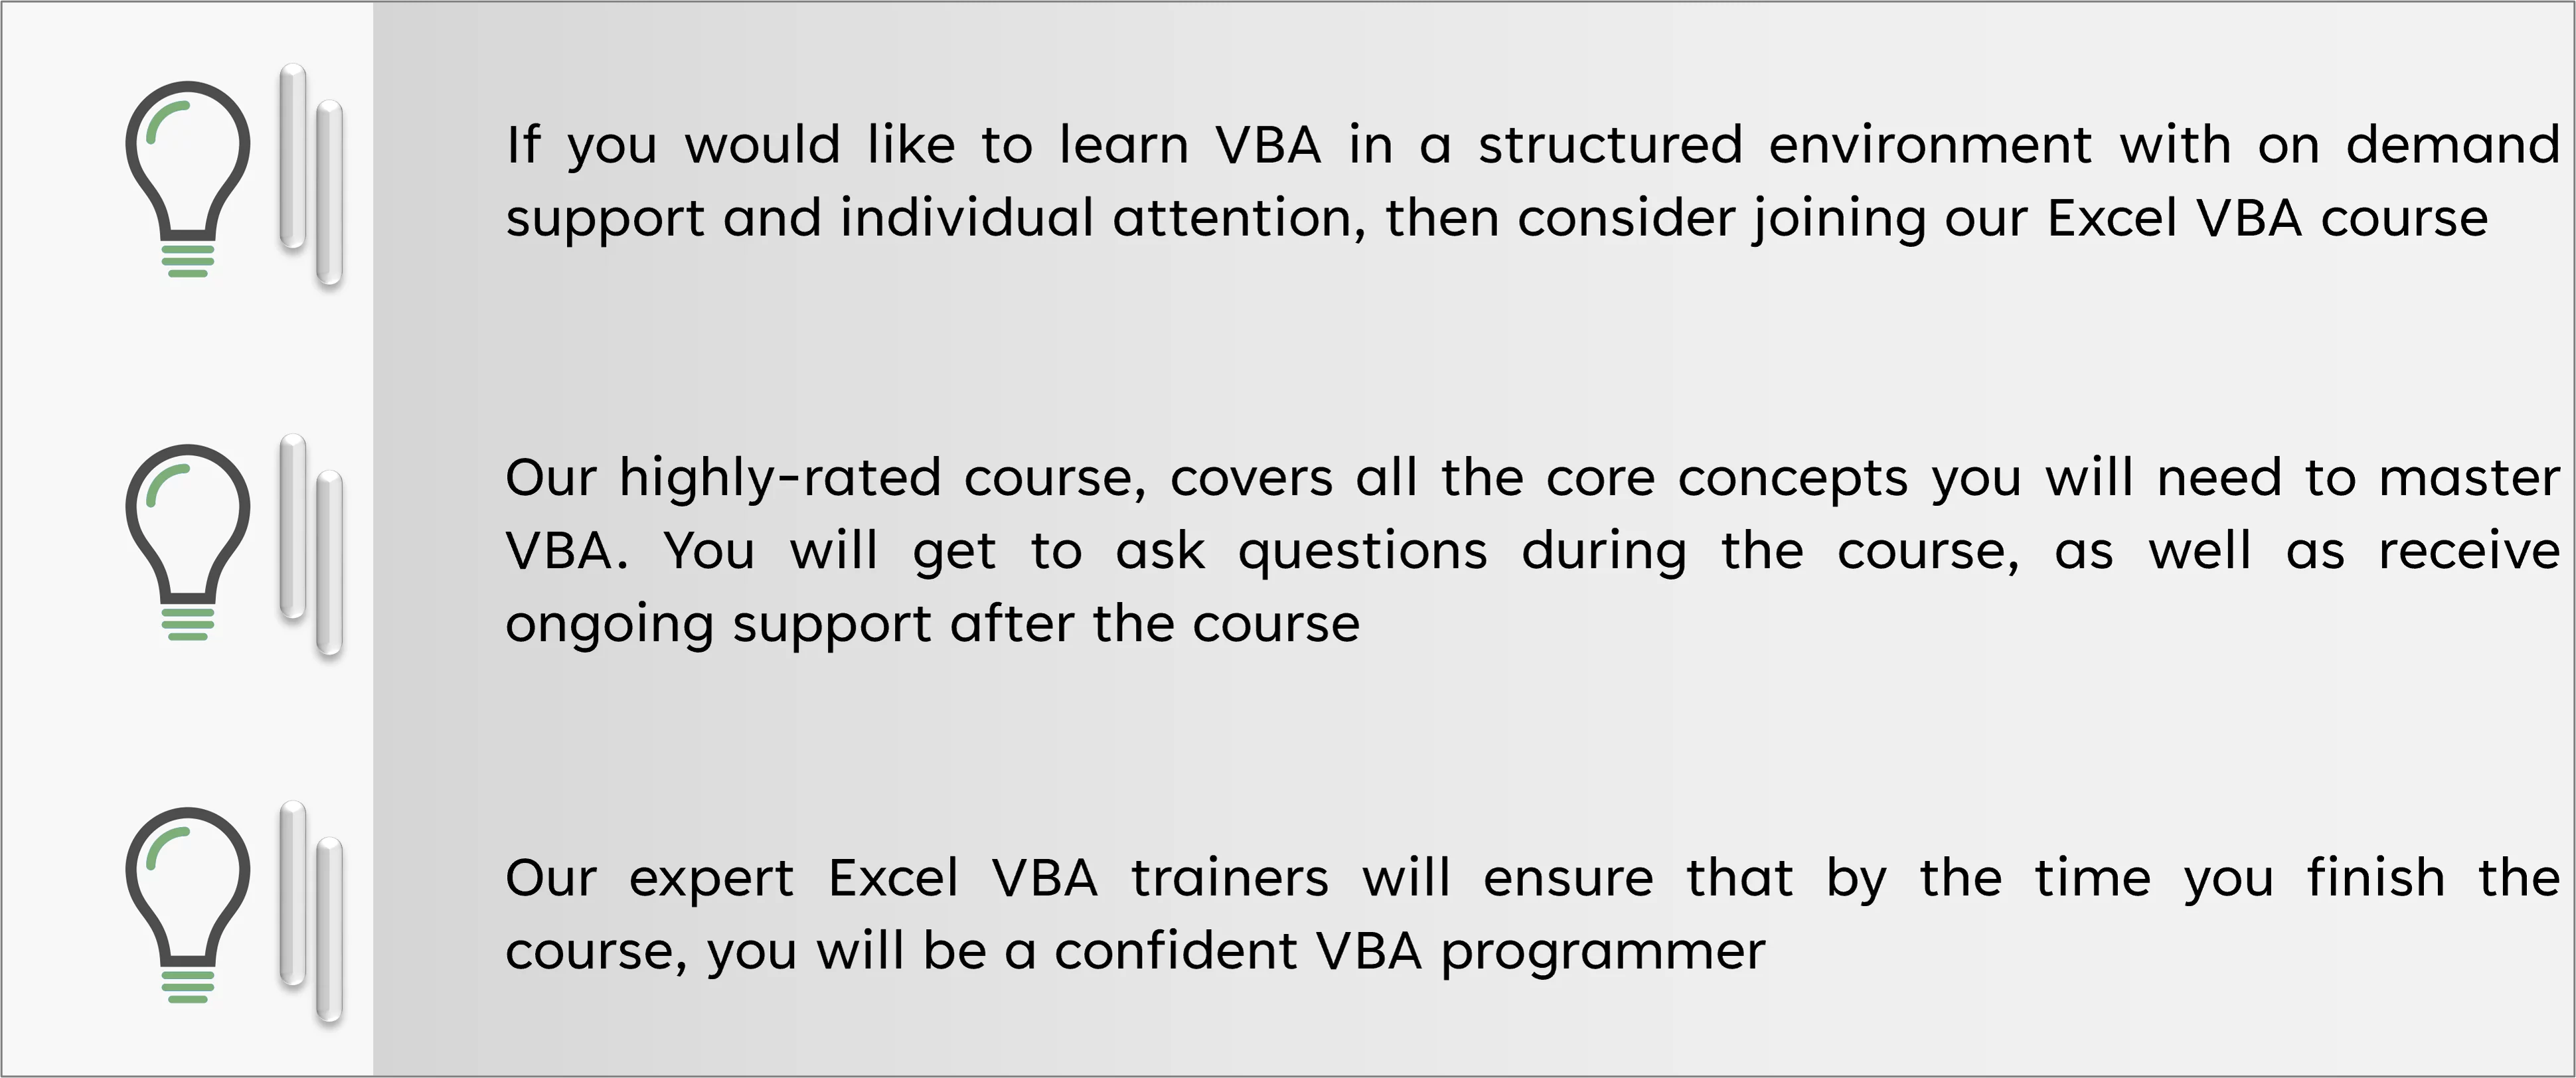 The benefits of signing up for the Excel VBA course graphic